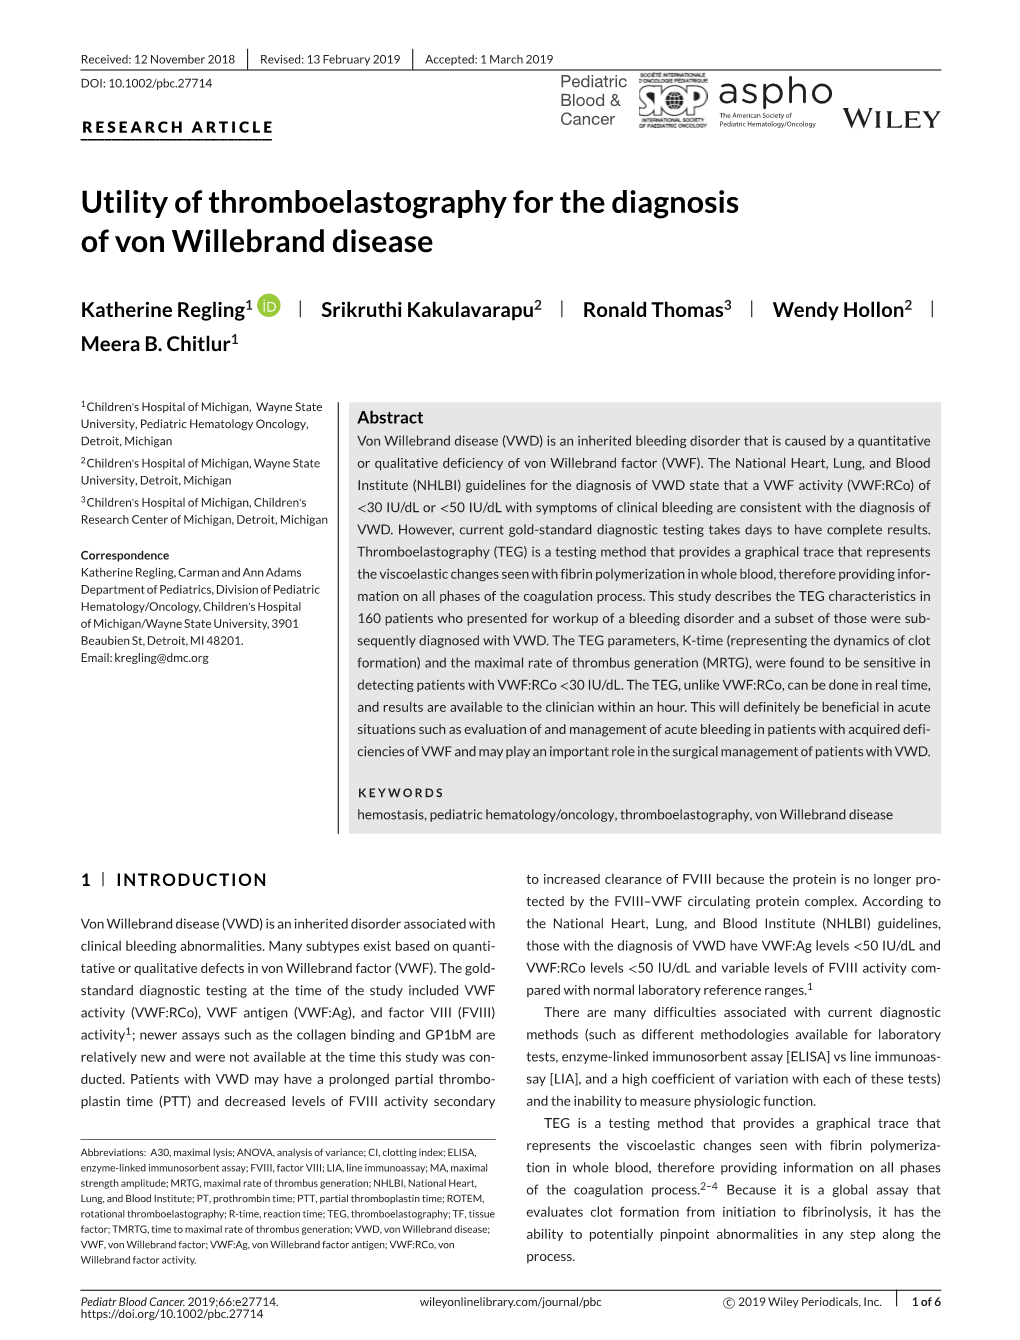 Utility of Thromboelastography for the Diagnosis of Von Willebrand Disease